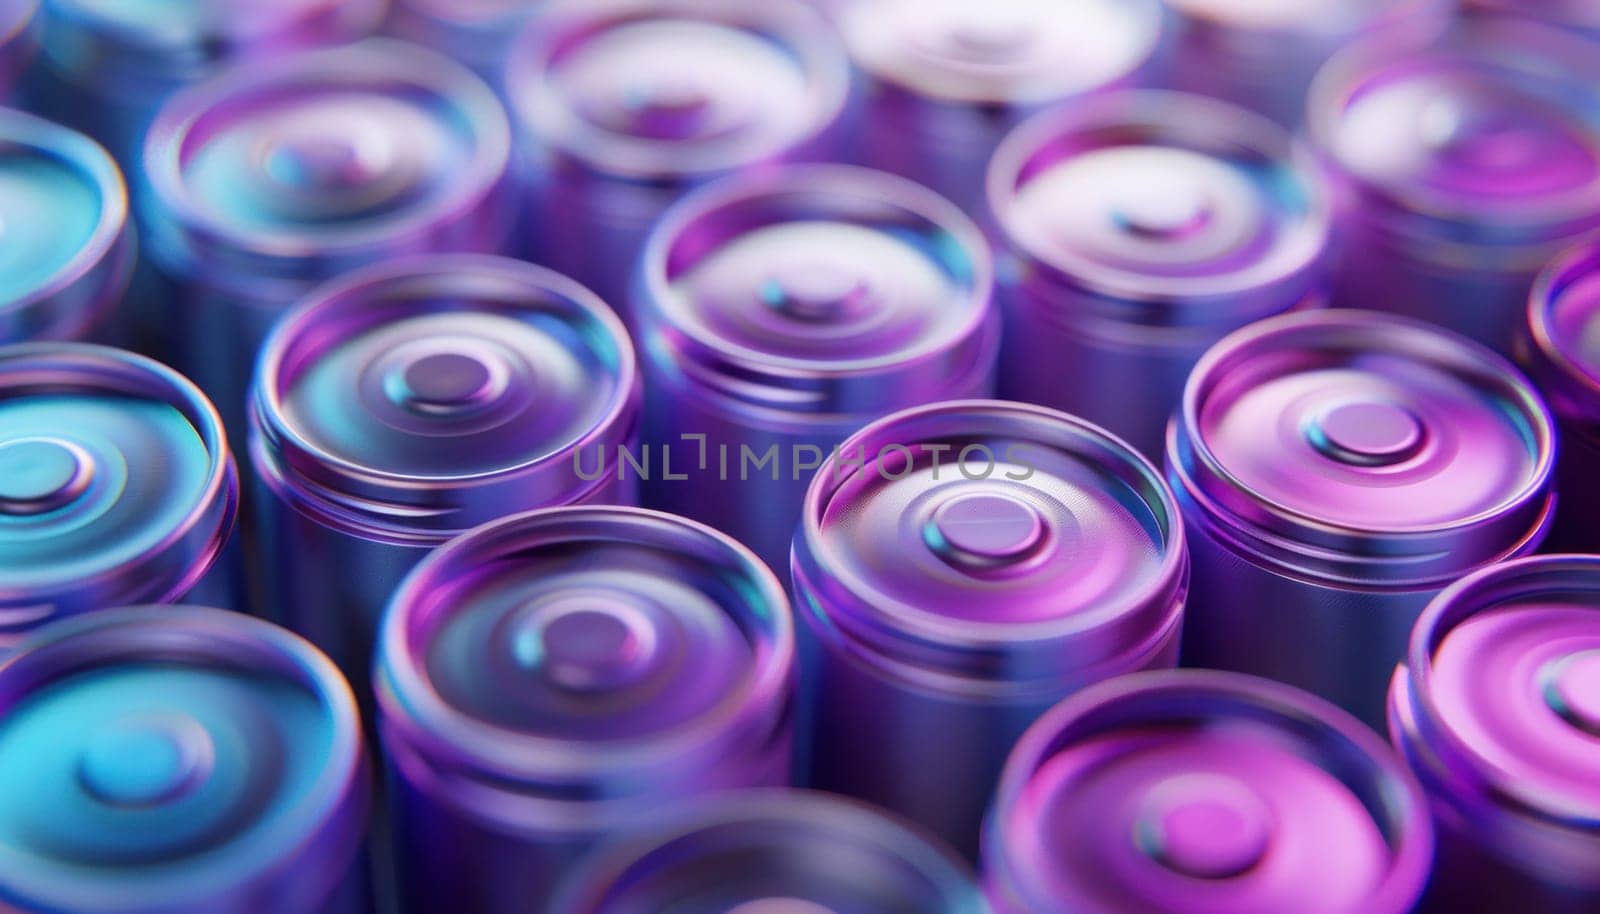 Group of purple and blue batteries in closeup shot for technology and energy concepts